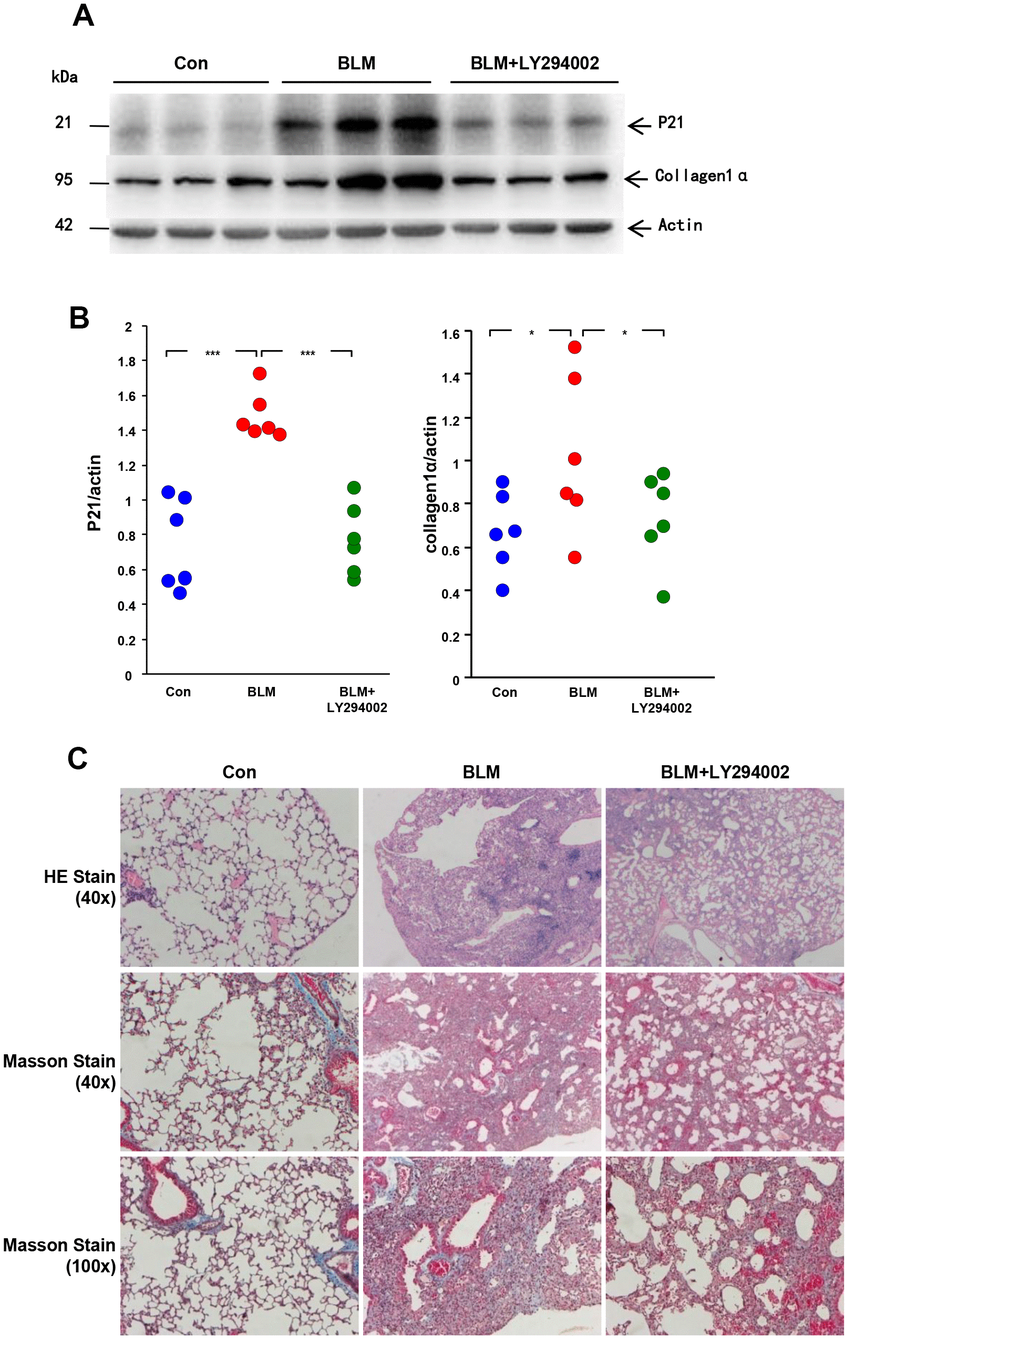 Akt inactivation attenuates AEC senescence and pulmonary fibrosis in vivo. C57BL/6 male mice were randomly divided into vehicle group (n = 6), bleomycin group (n = 6) and inhibitor group (n=6). Mice in the vehicle group were intratracheally injected with 50 μl of 0.9% saline, and mice in the bleomycin group and inhibitor group were injected intratracheally with 50 μl of 5 mg/kg bleomycin. From the day of bleomycin injection, mice in the inhibitor group were treated daily with LY294002 (50 mg/kg) through intraperitoneal injection. On day 14 after bleomycin or saline treatment, lungs were harvested. (A, B) Expression of the P21WAF1 senescent marker and the collagen1α fibrotic marker was detected by western blot analysis. Dots in the graph represent values for each individual mouse. *p p C) Representative results of HE and Masson staining of mouse lung tissues.